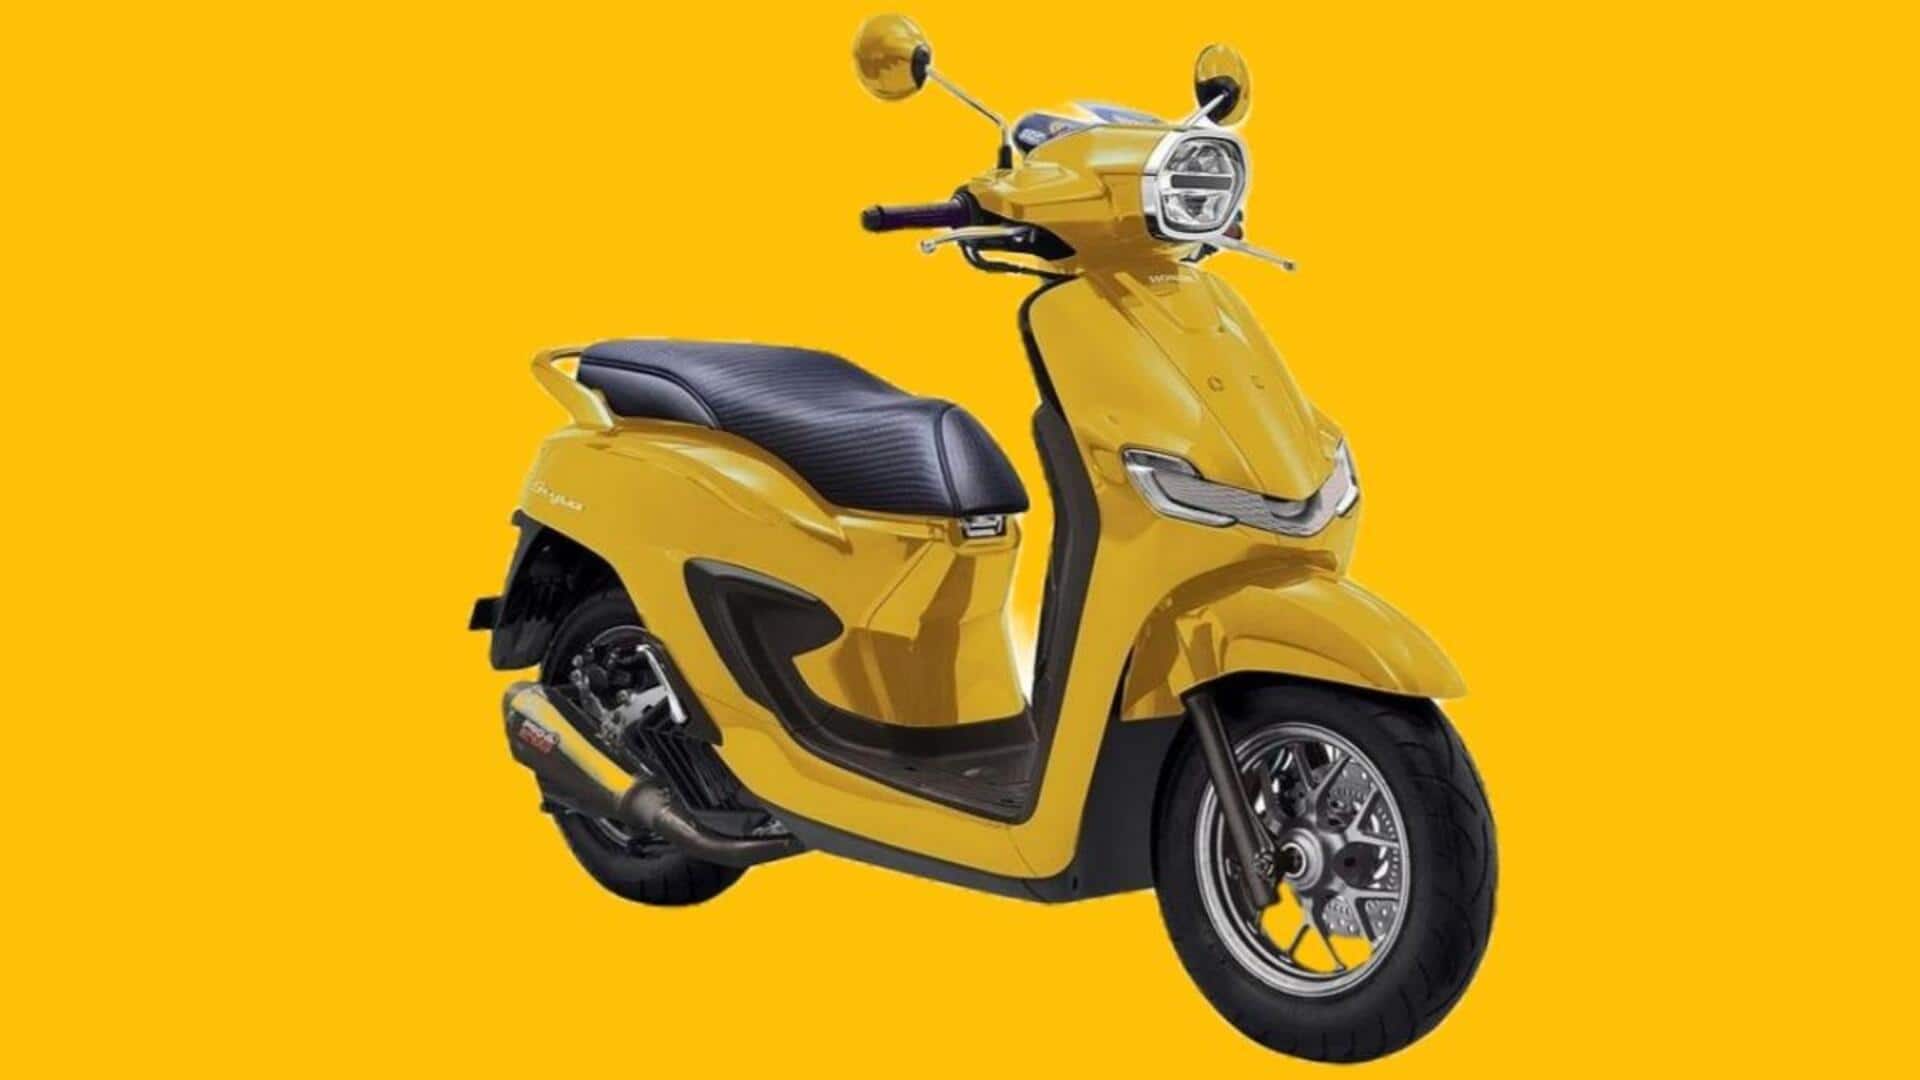 Honda to broaden its Indian scooter portfolio with Stylo 160